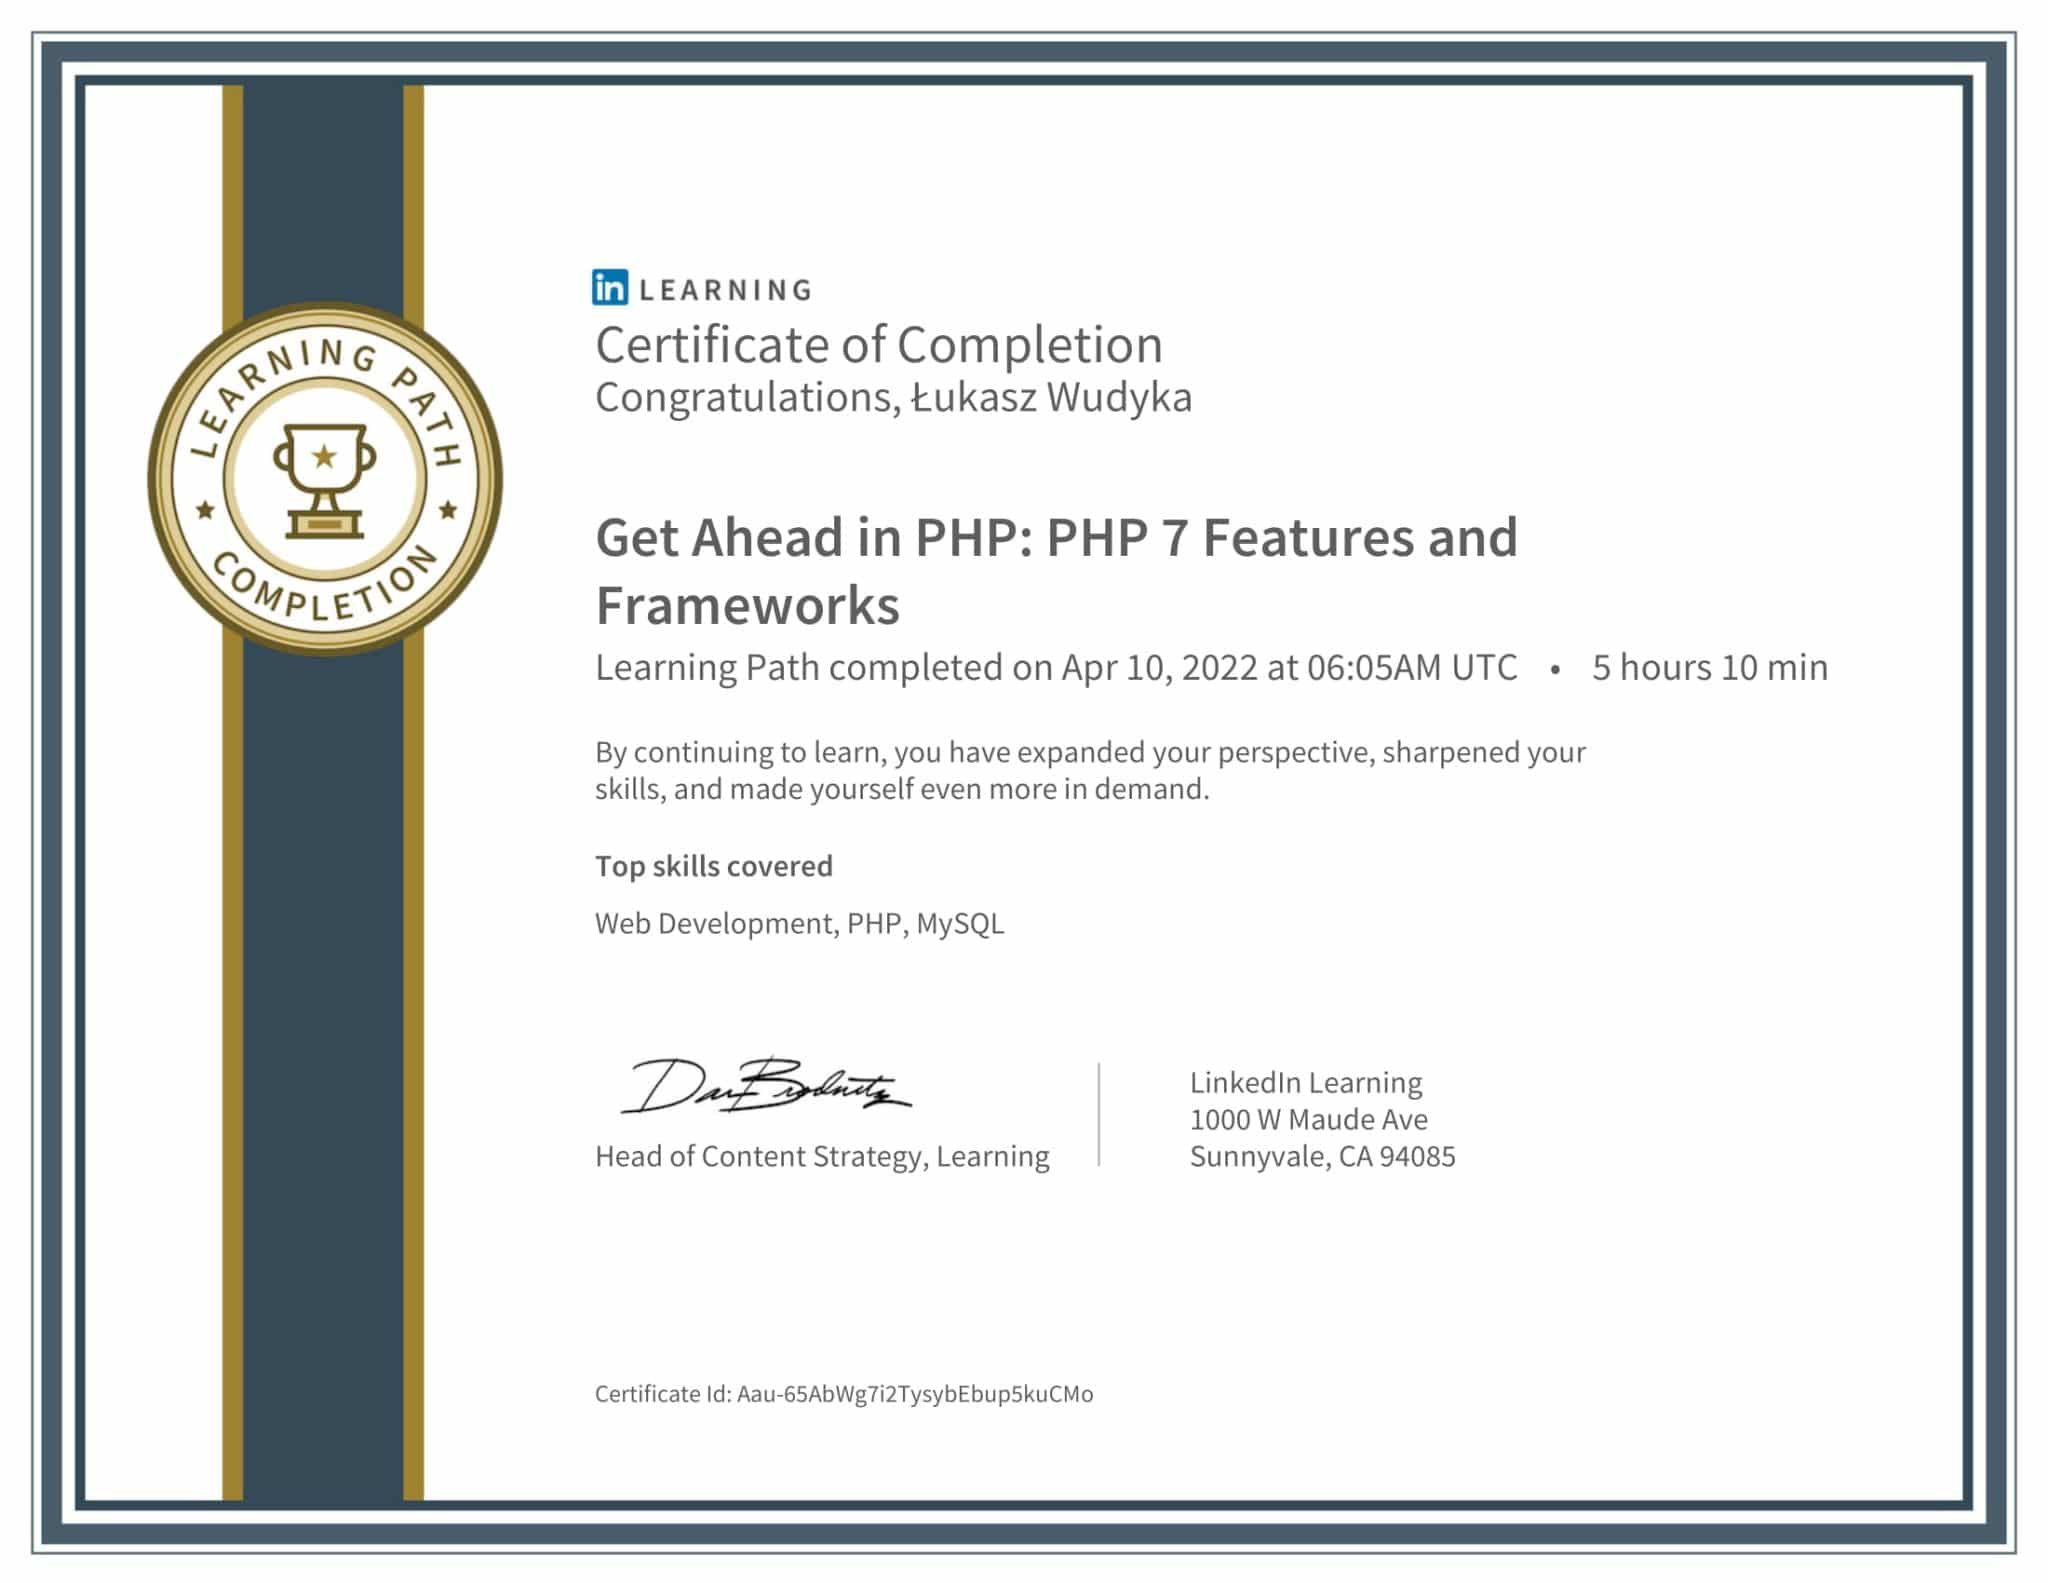 CertificateOfCompletion_Get Ahead in PHP PHP 7 Features and Frameworks-1